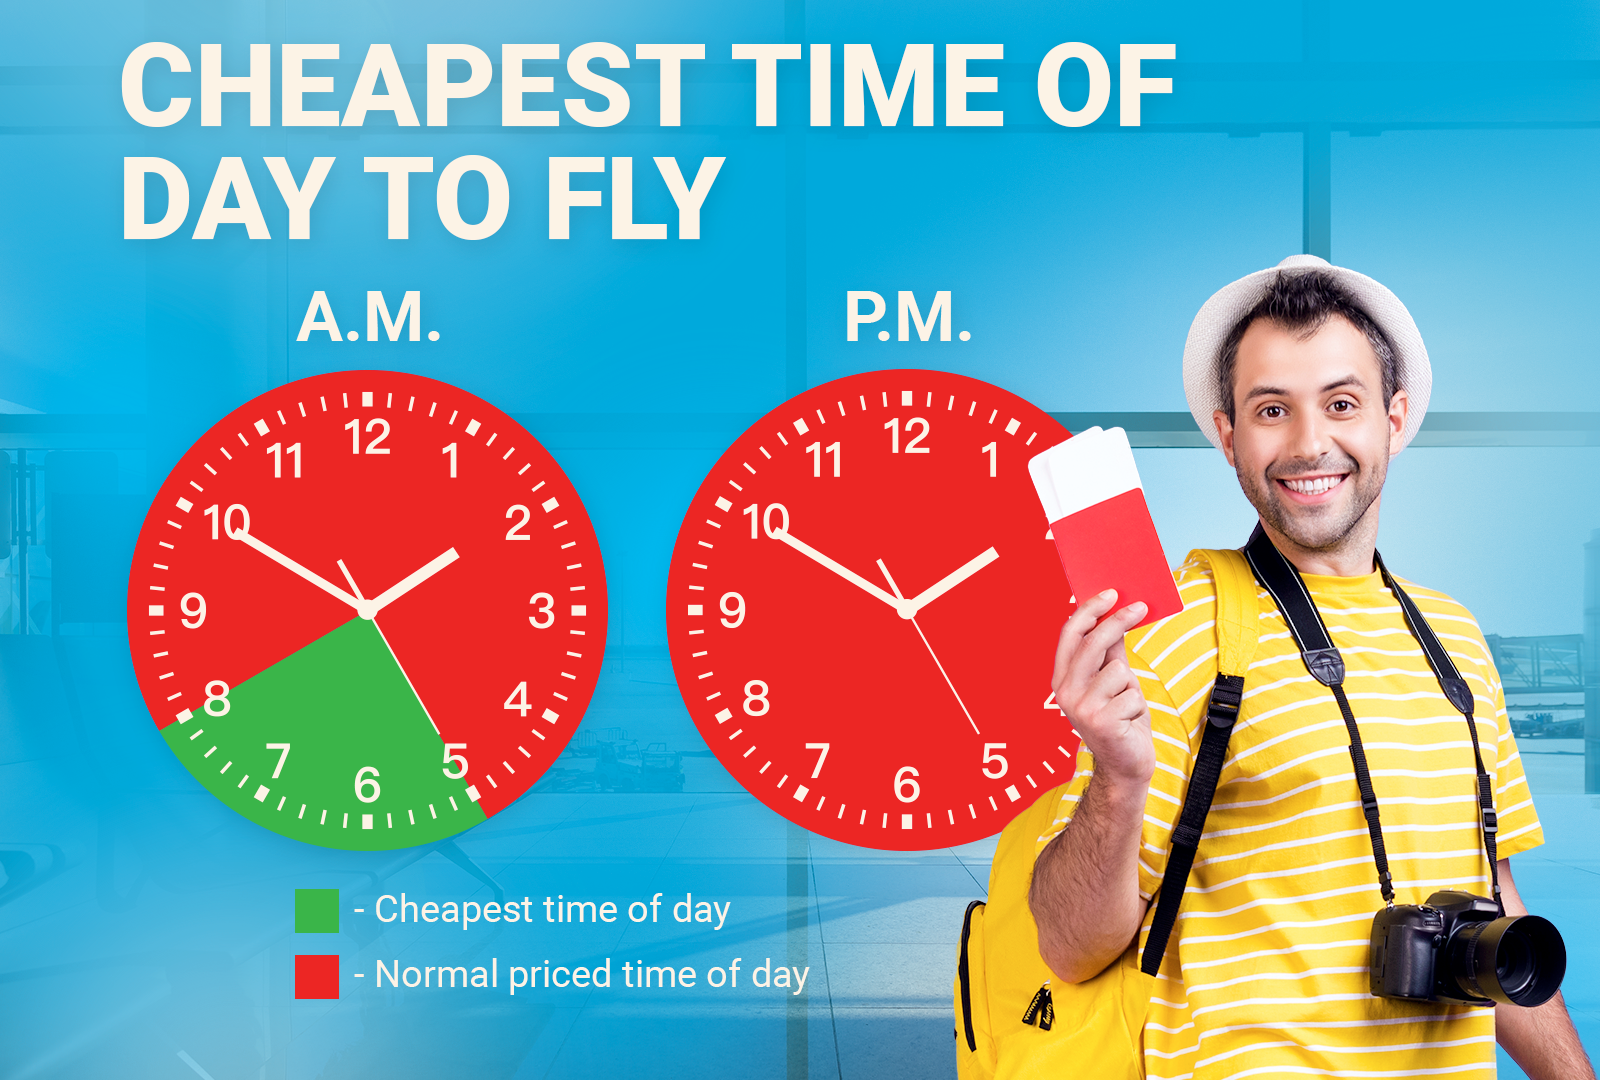 The cheapest time of day to fly in a graphic image with a man holding a ticket next to it